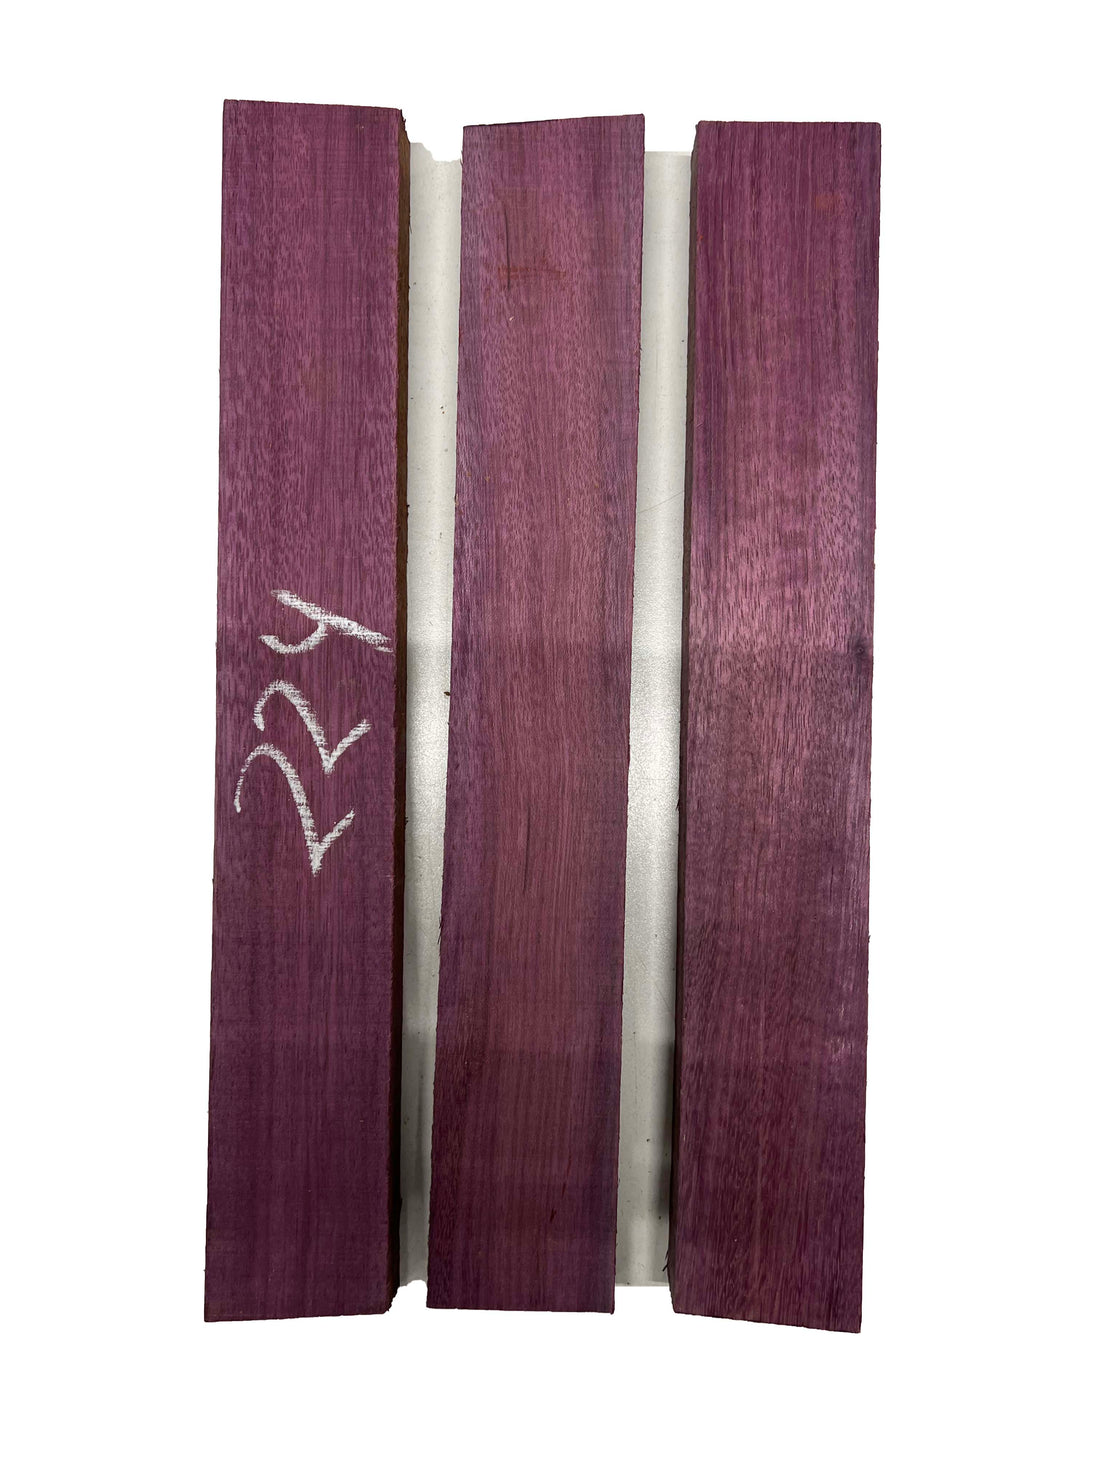 Pack Of 3, Purpleheart Thin Stock Three Dimensional Lumber Wood Blank 14&quot;x2&quot;x3/4&quot; 